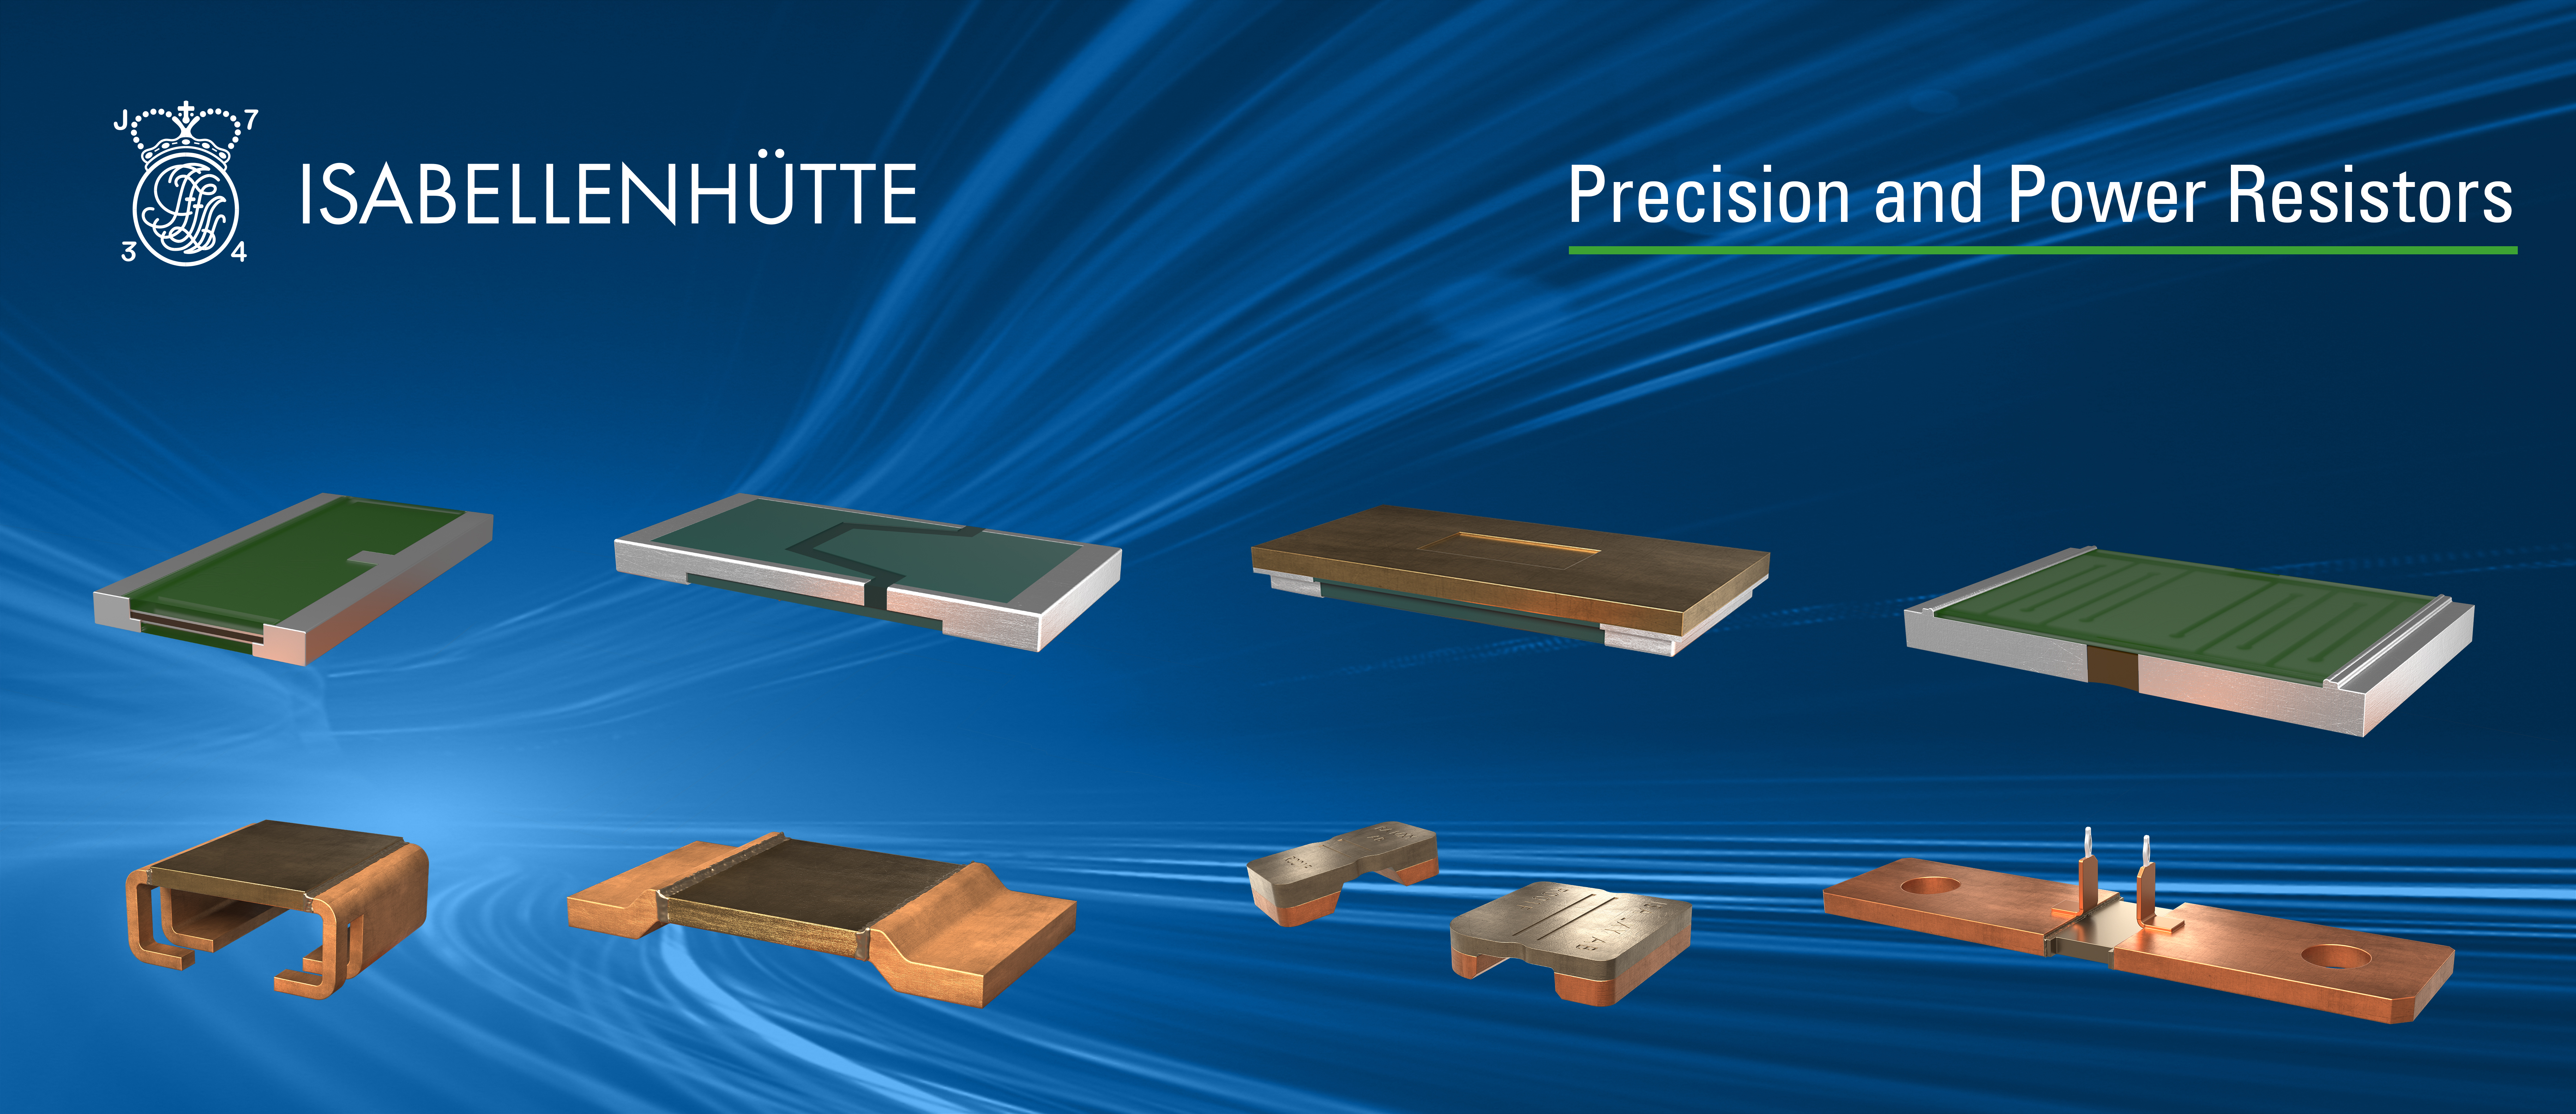 Arrow Electronics Adds Precision and Power Resistors from Isabellenhütte